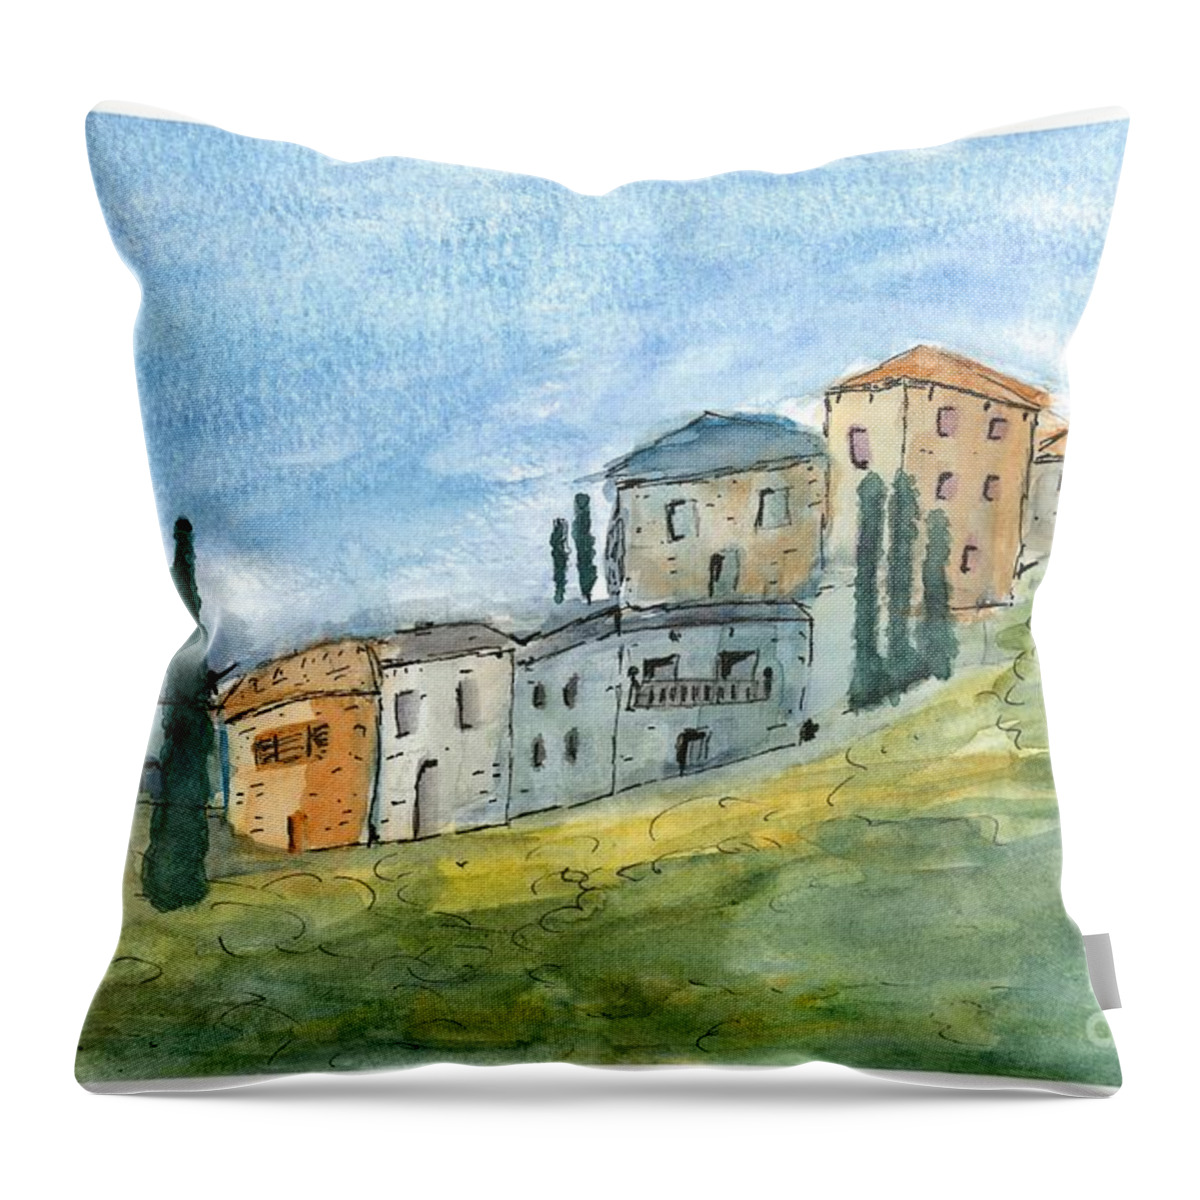 Water Throw Pillow featuring the painting Italiano by Loretta Coca